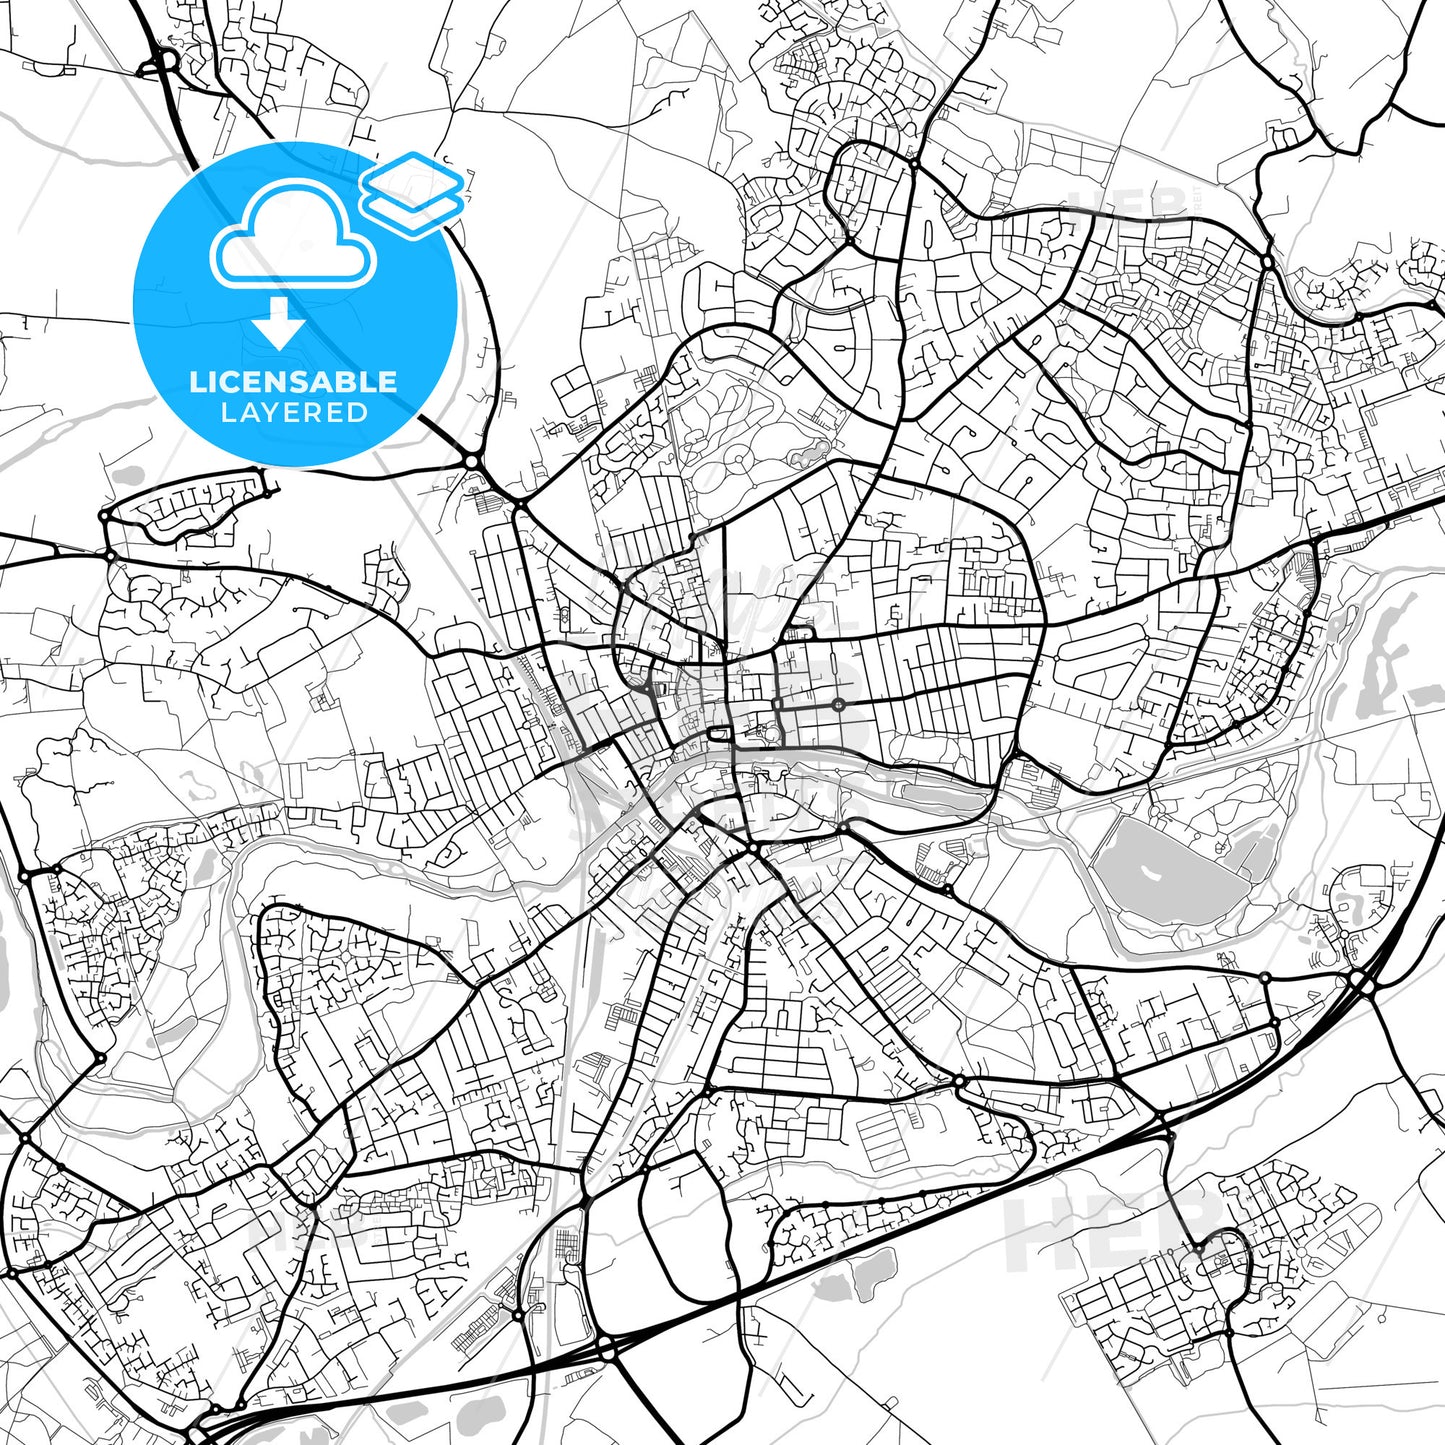 Layered PDF map of Bedford, East of England, England